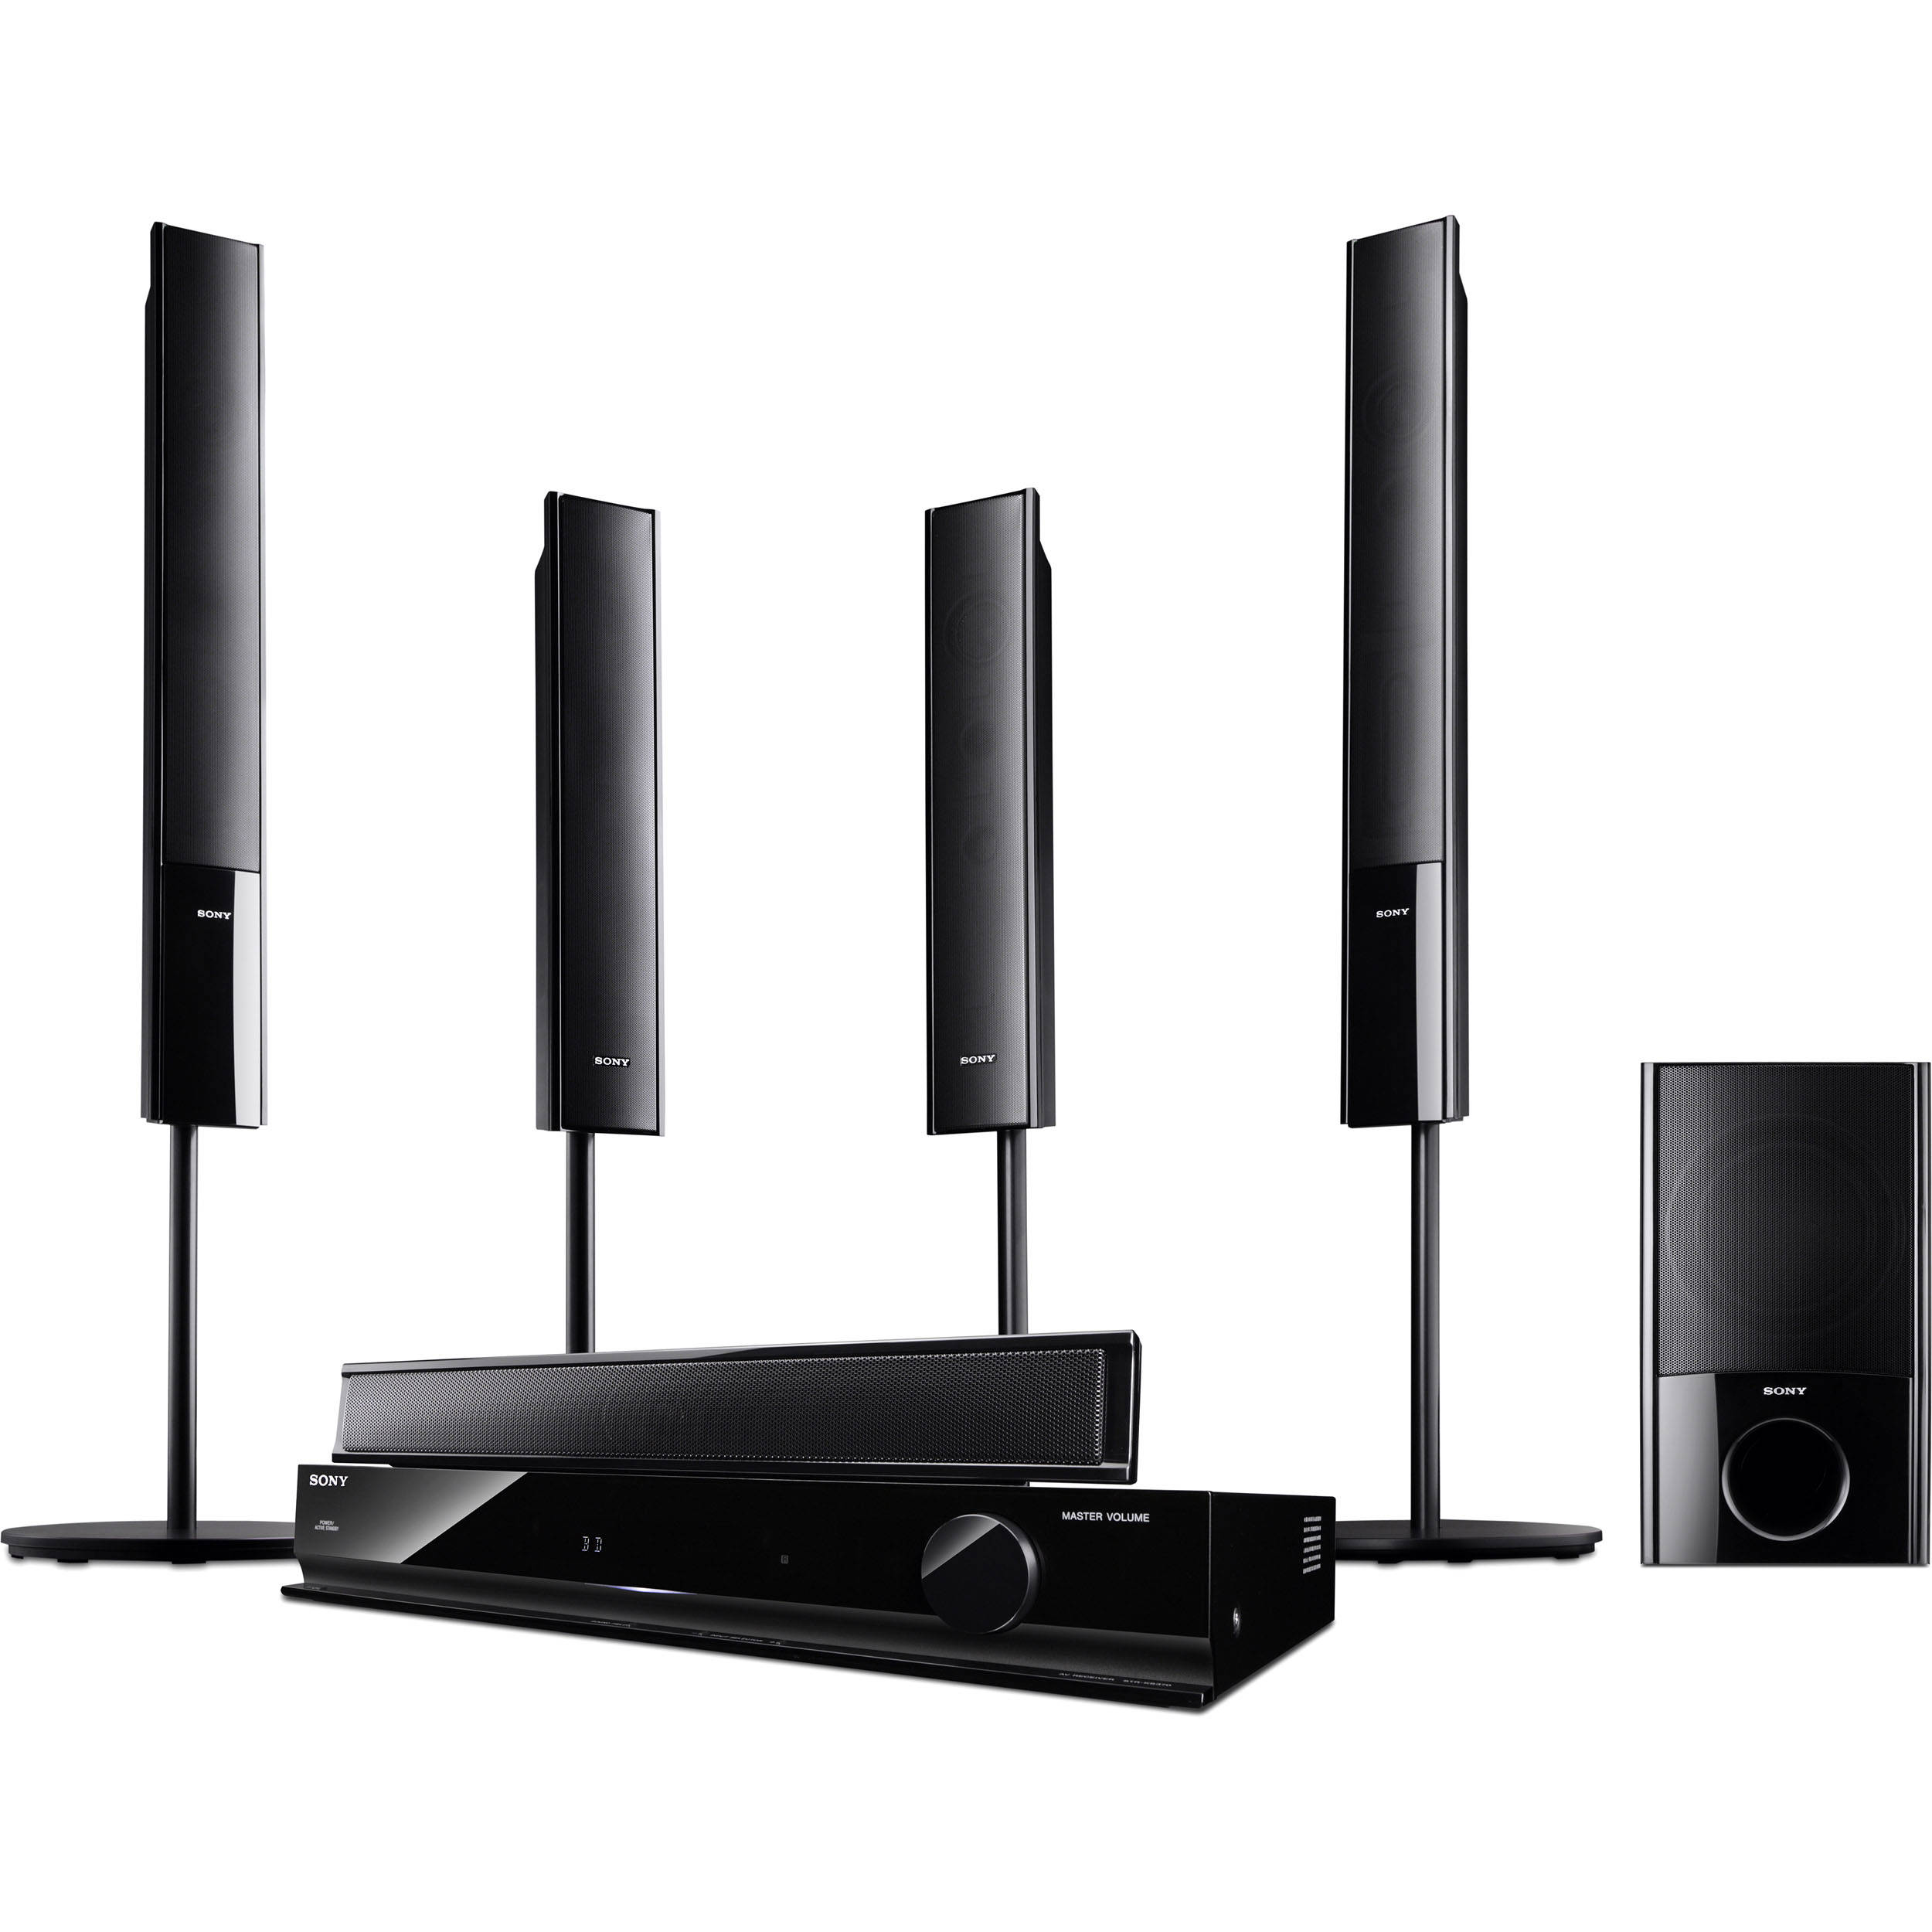 5.1 channel home theatre system